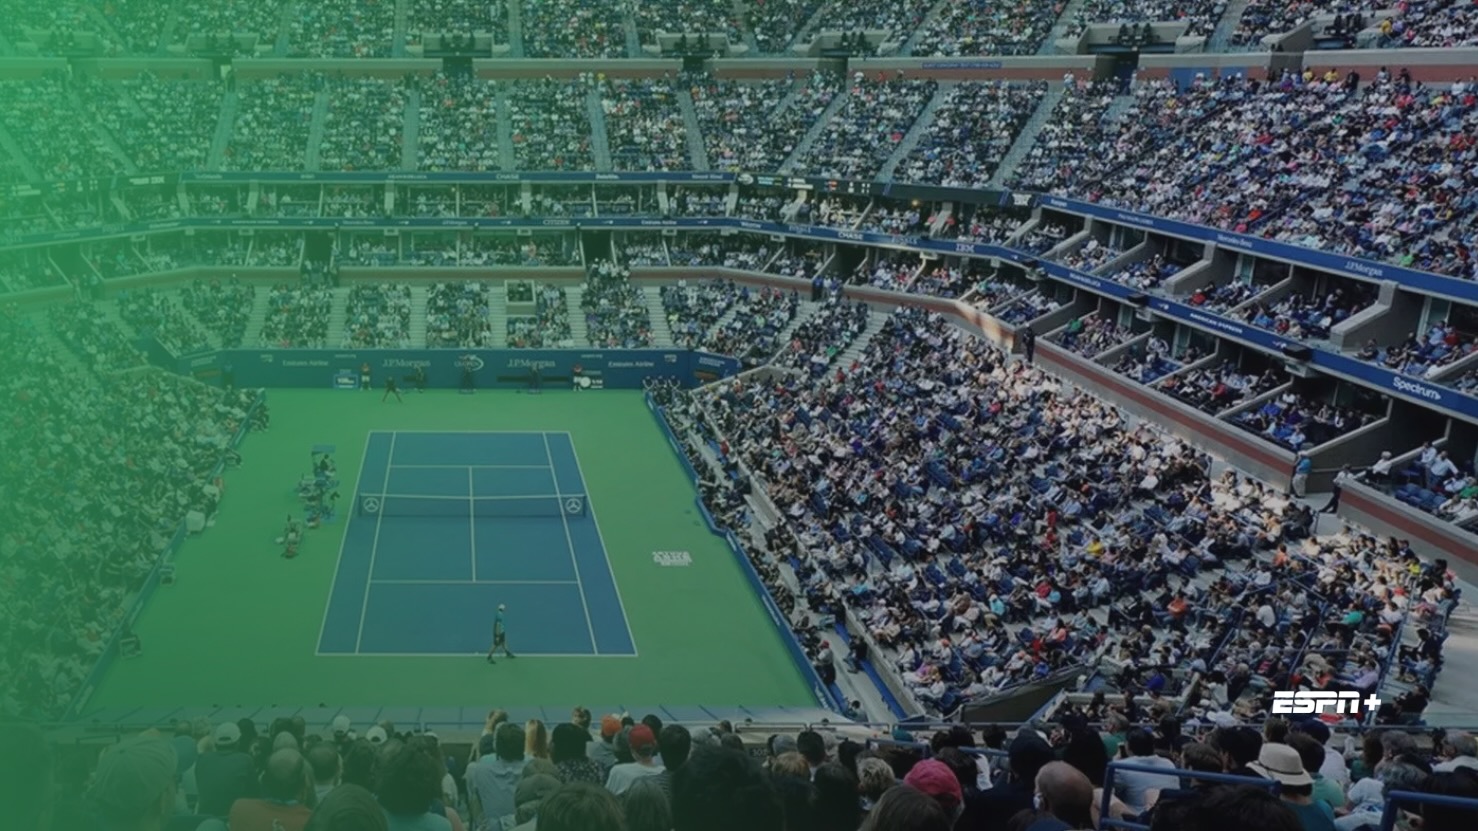 How to Watch the Tennis U.S